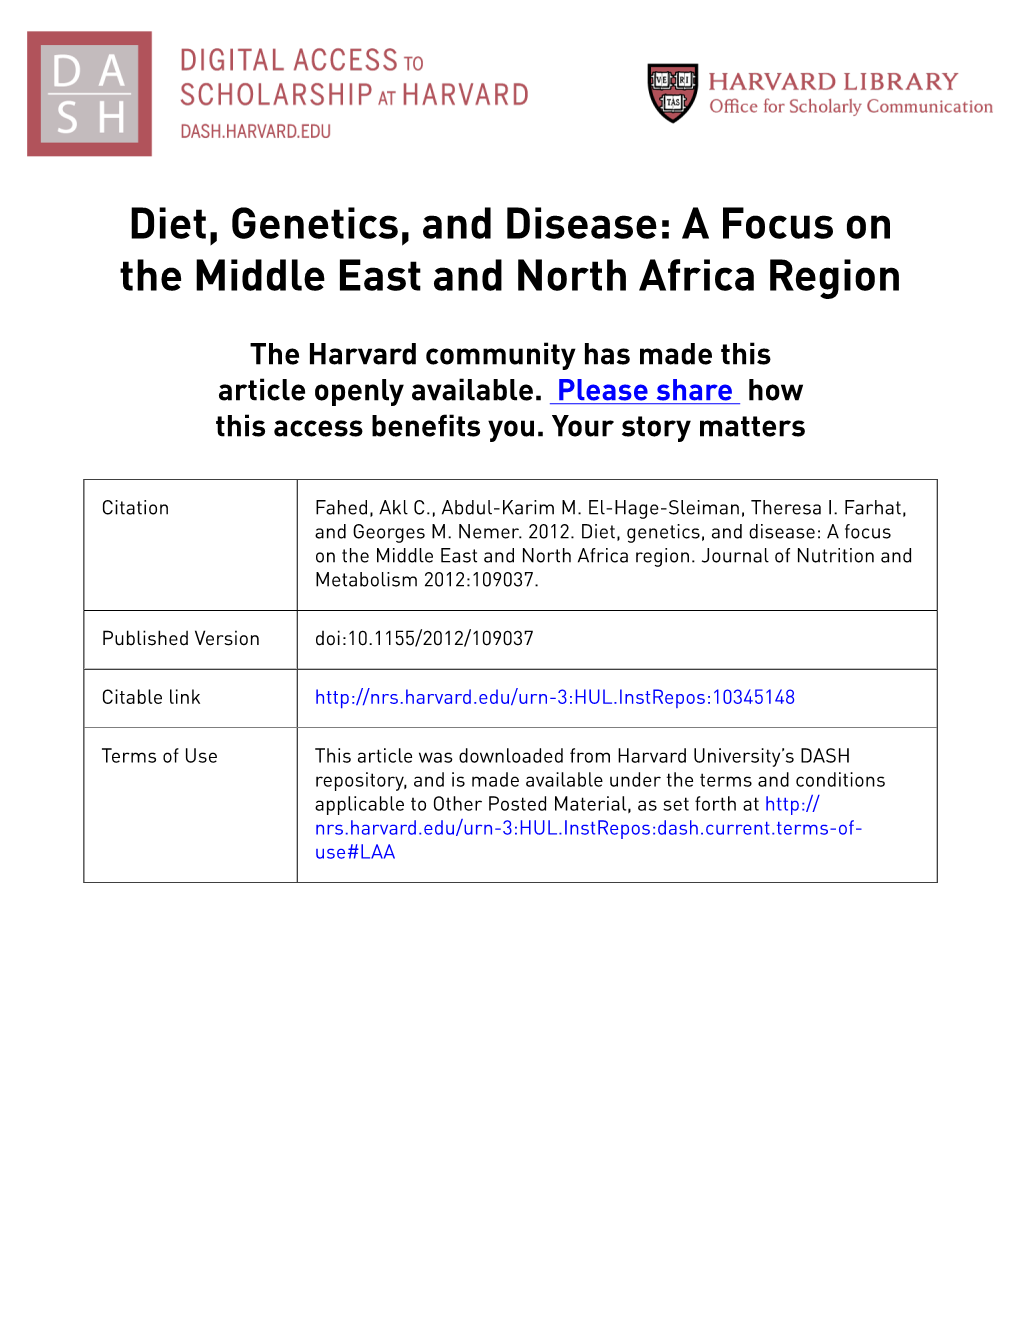 Diet, Genetics, and Disease: a Focus on the Middle East and North Africa Region